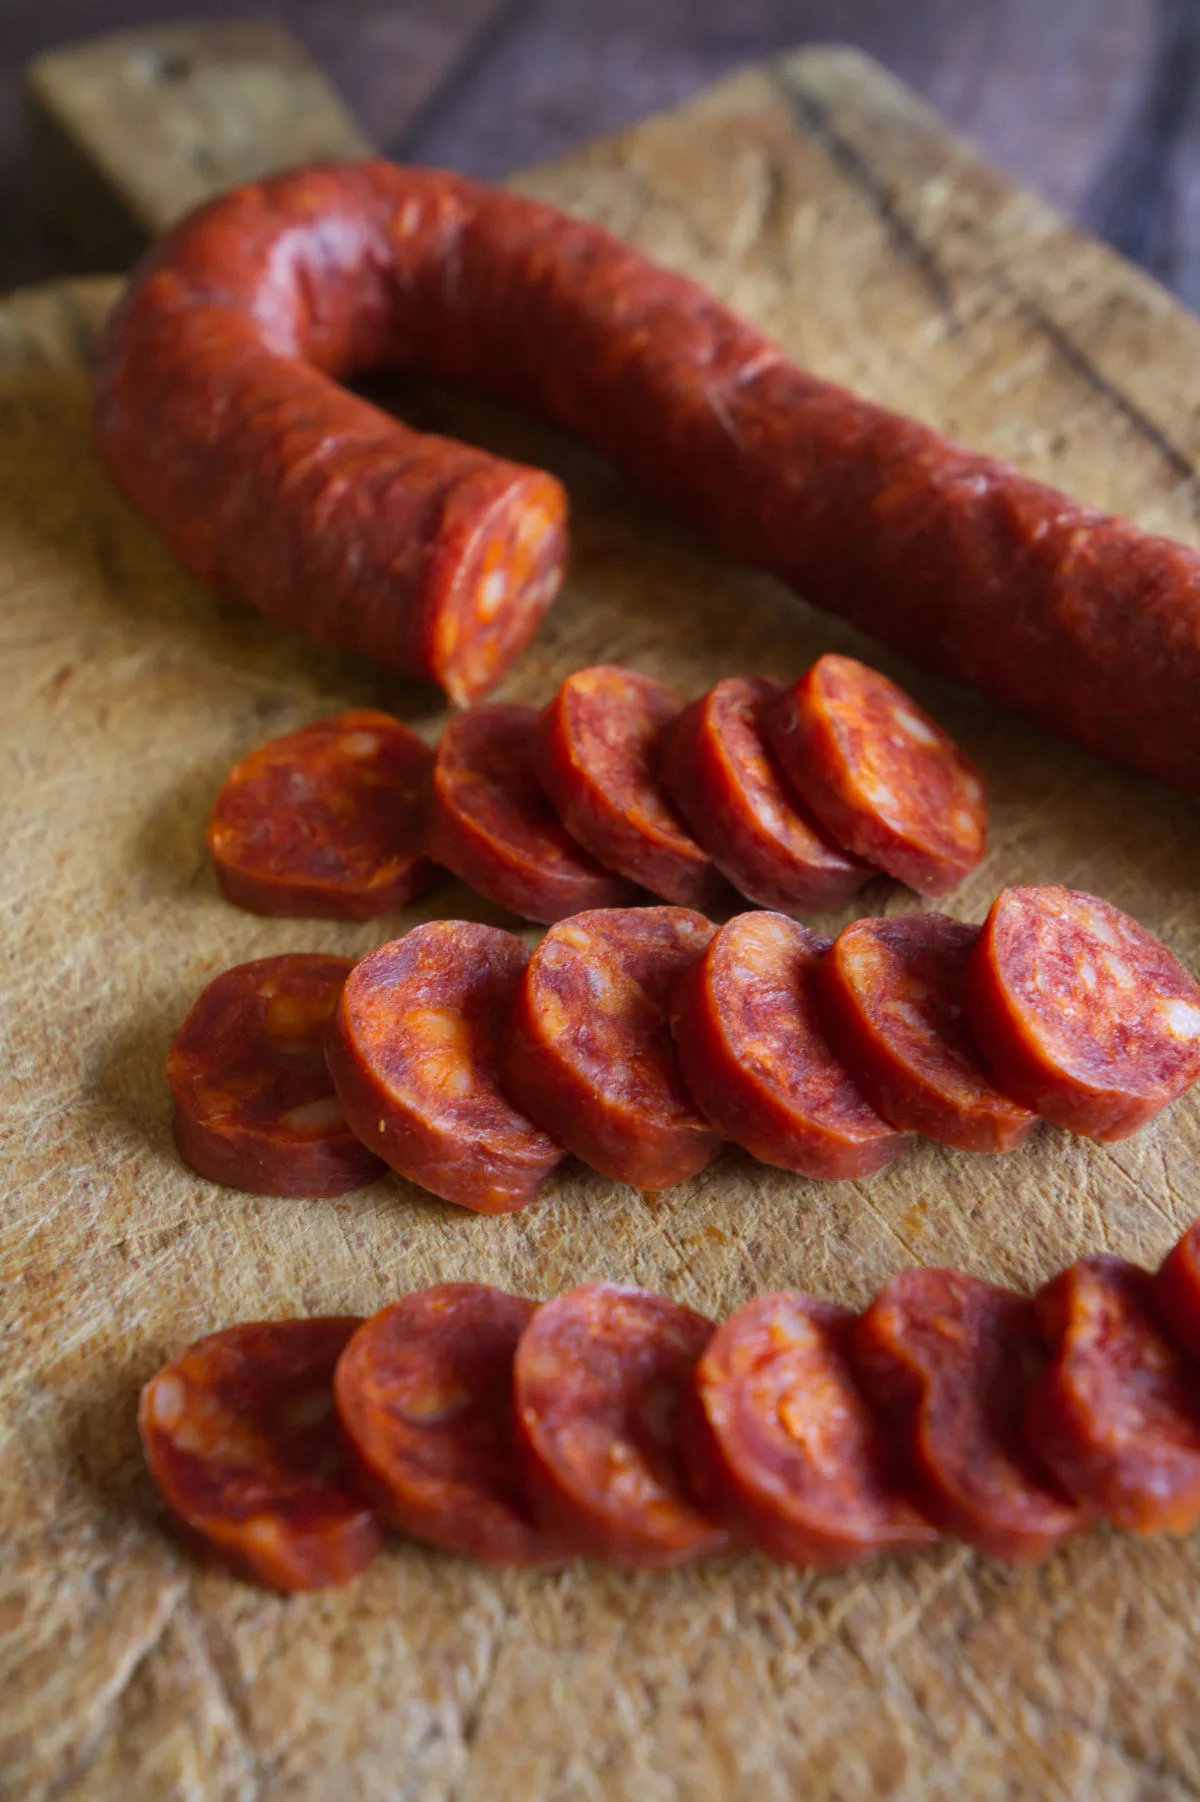 A CHOPPING BOARD WITH SOME FRESH RED CHORIZO CUT INTO SLICES. 